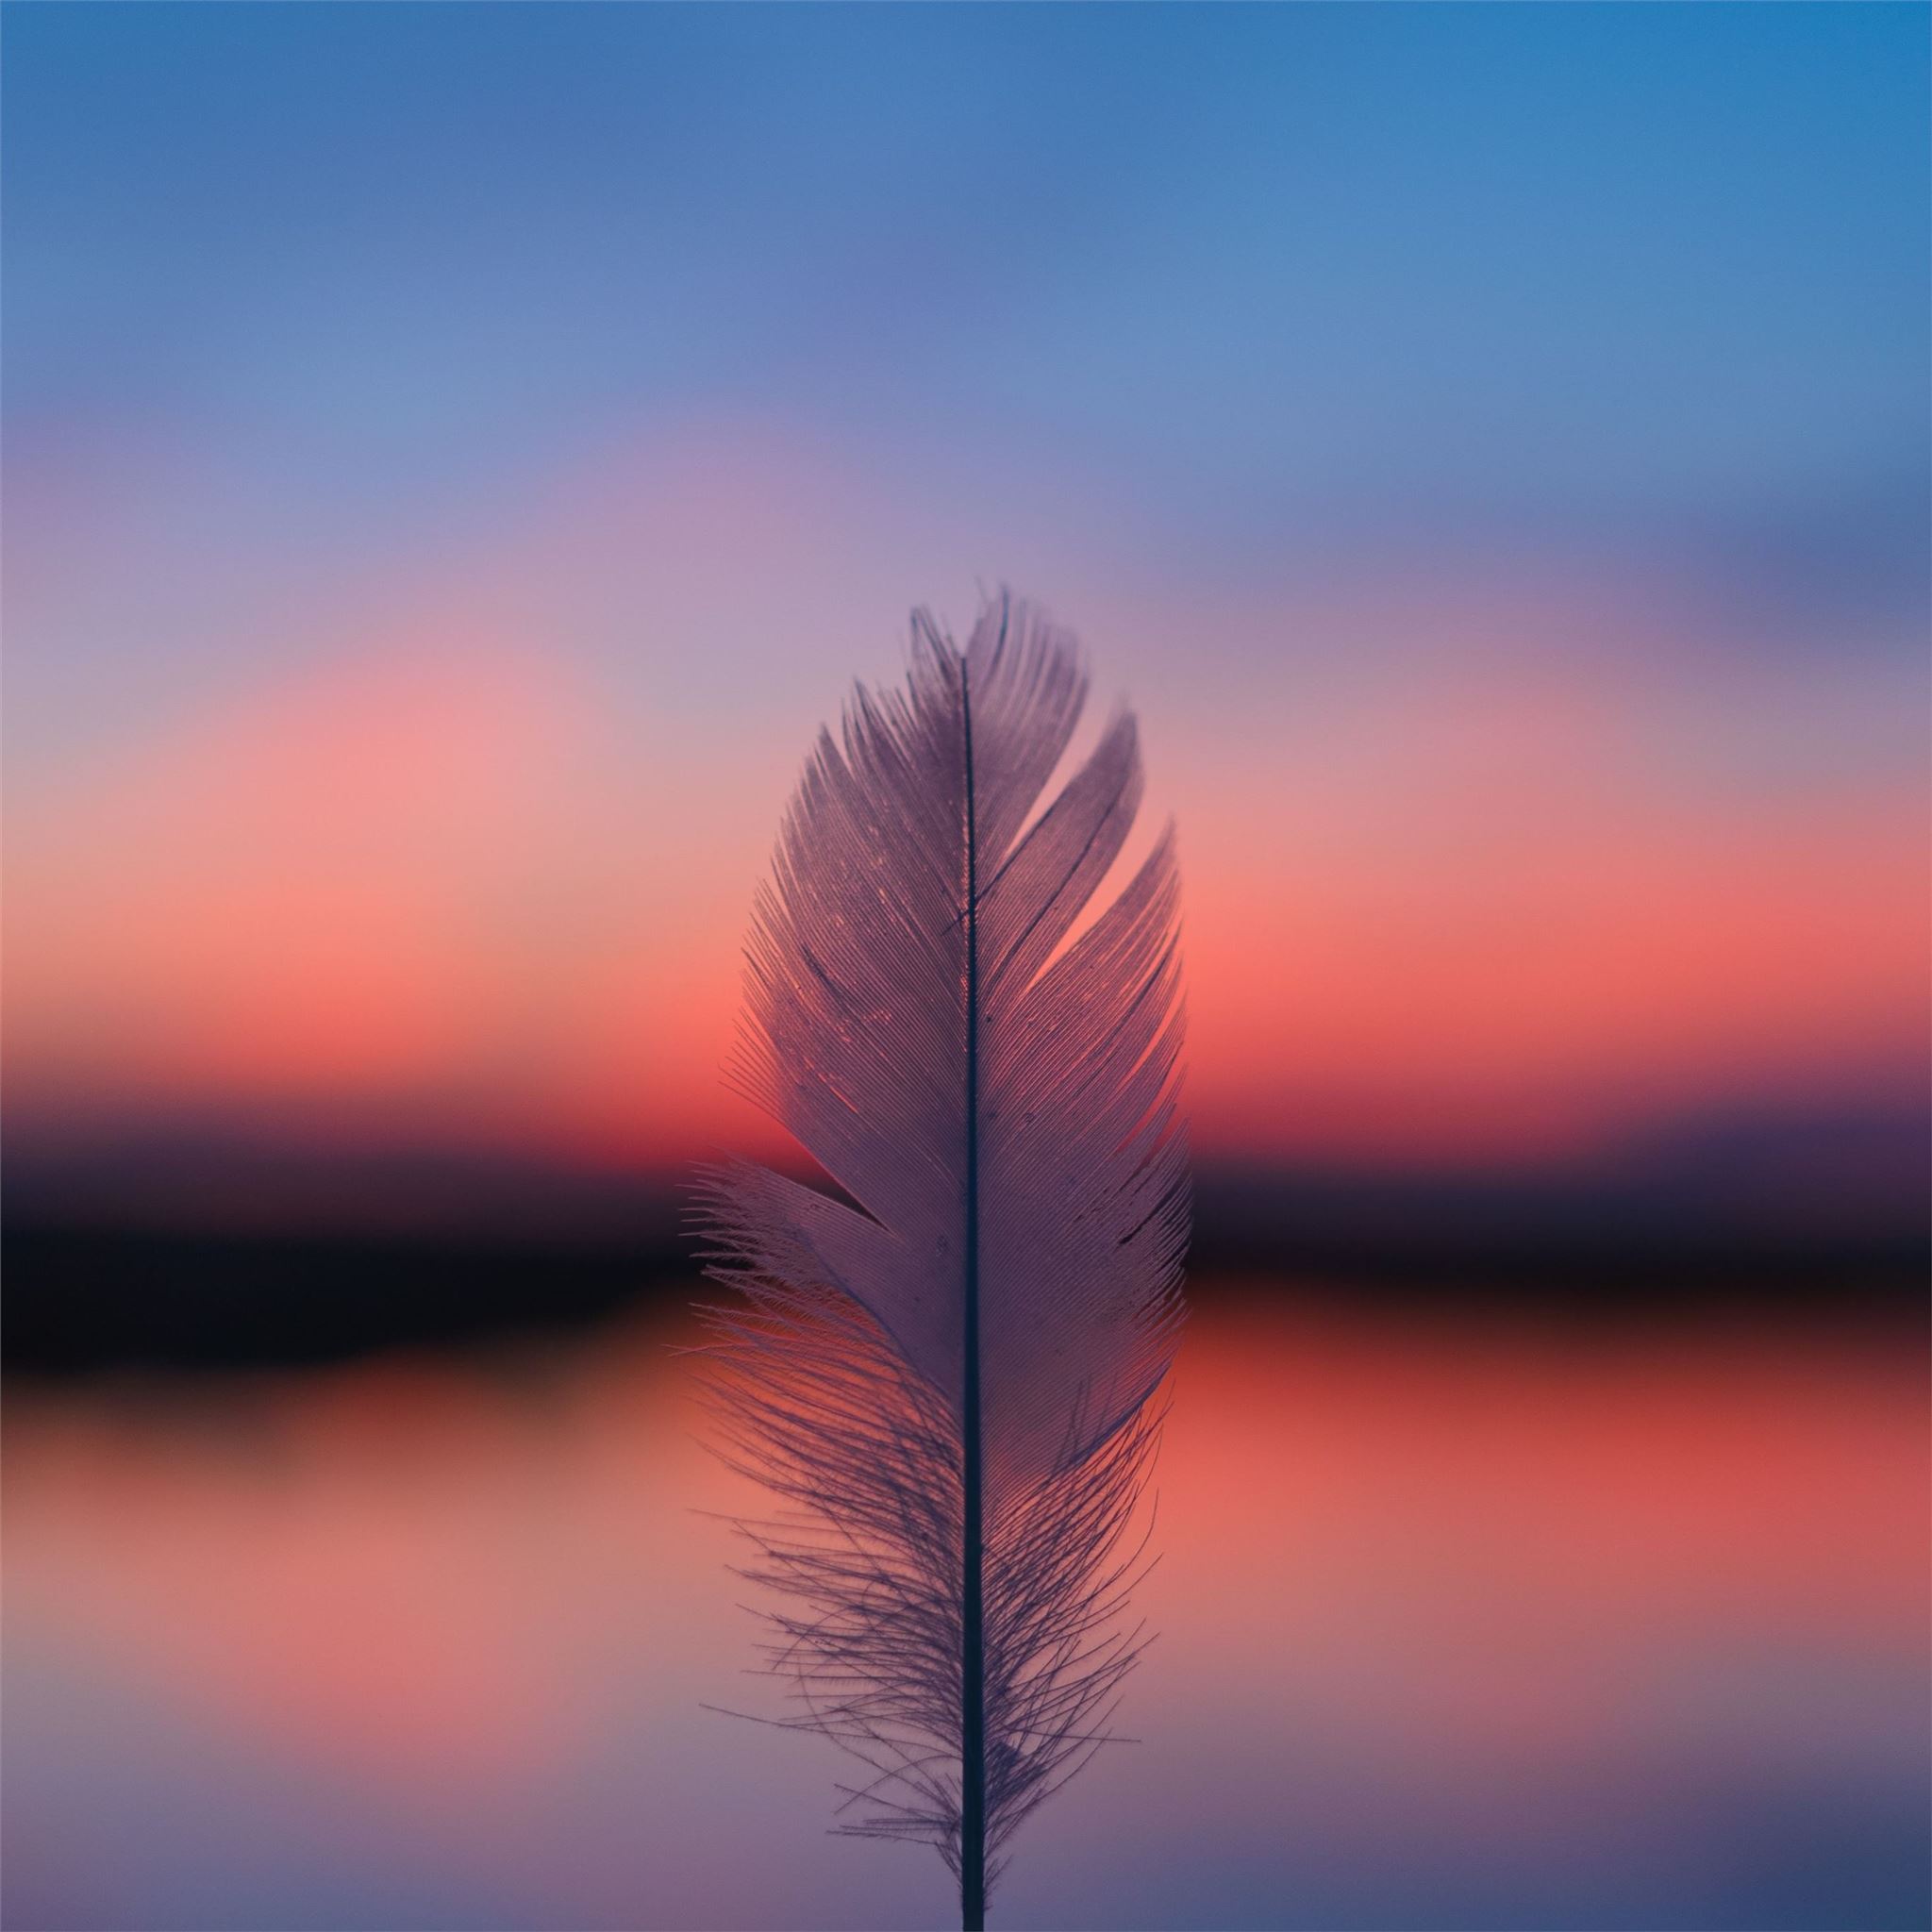 Feather Focus Blur Sunset 5k Ipad Air Wallpapers Free Download